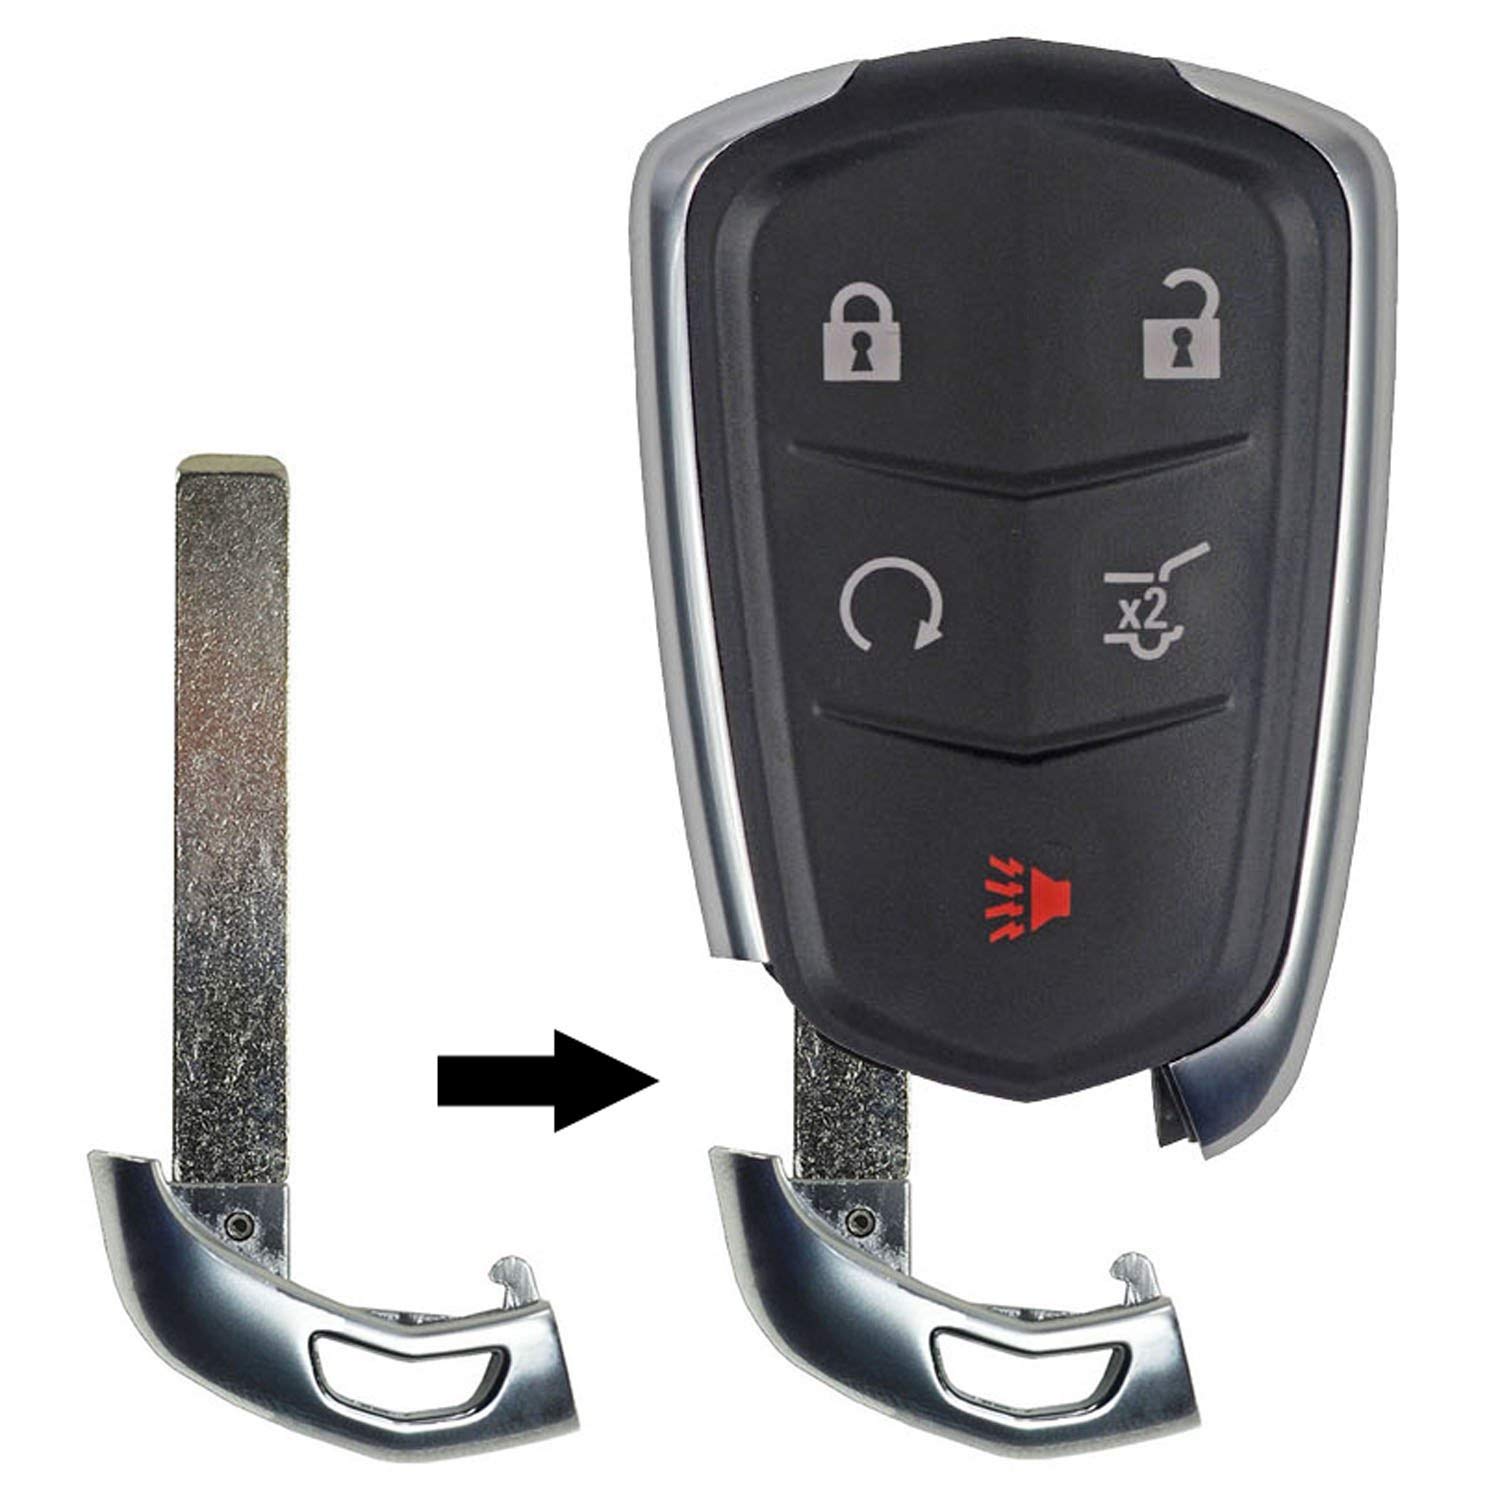 Battery replacement for cadillac key fob